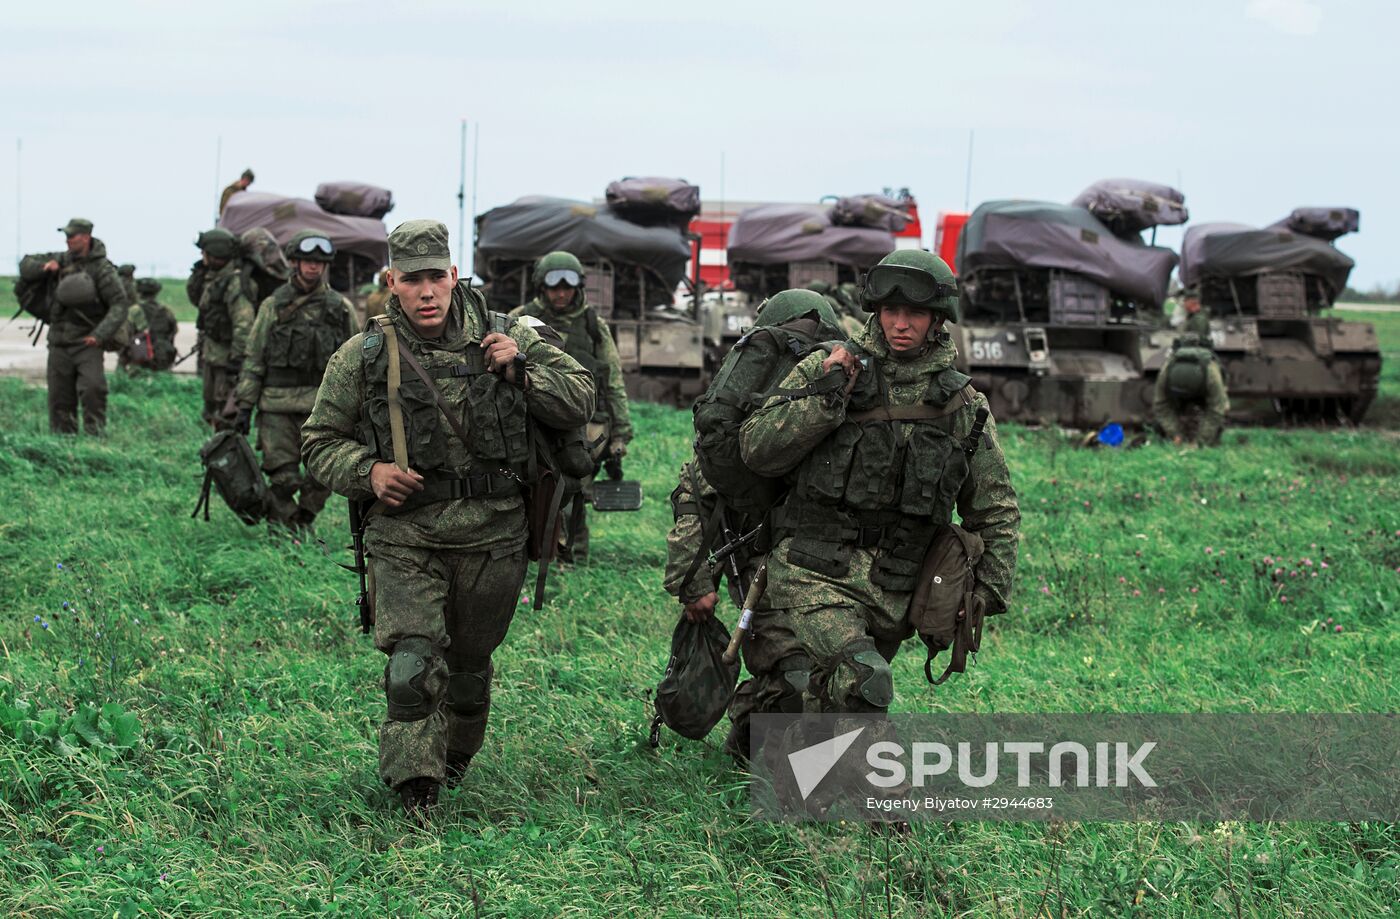 Training exercise for Russia's Airborne Forces in Ryazan region